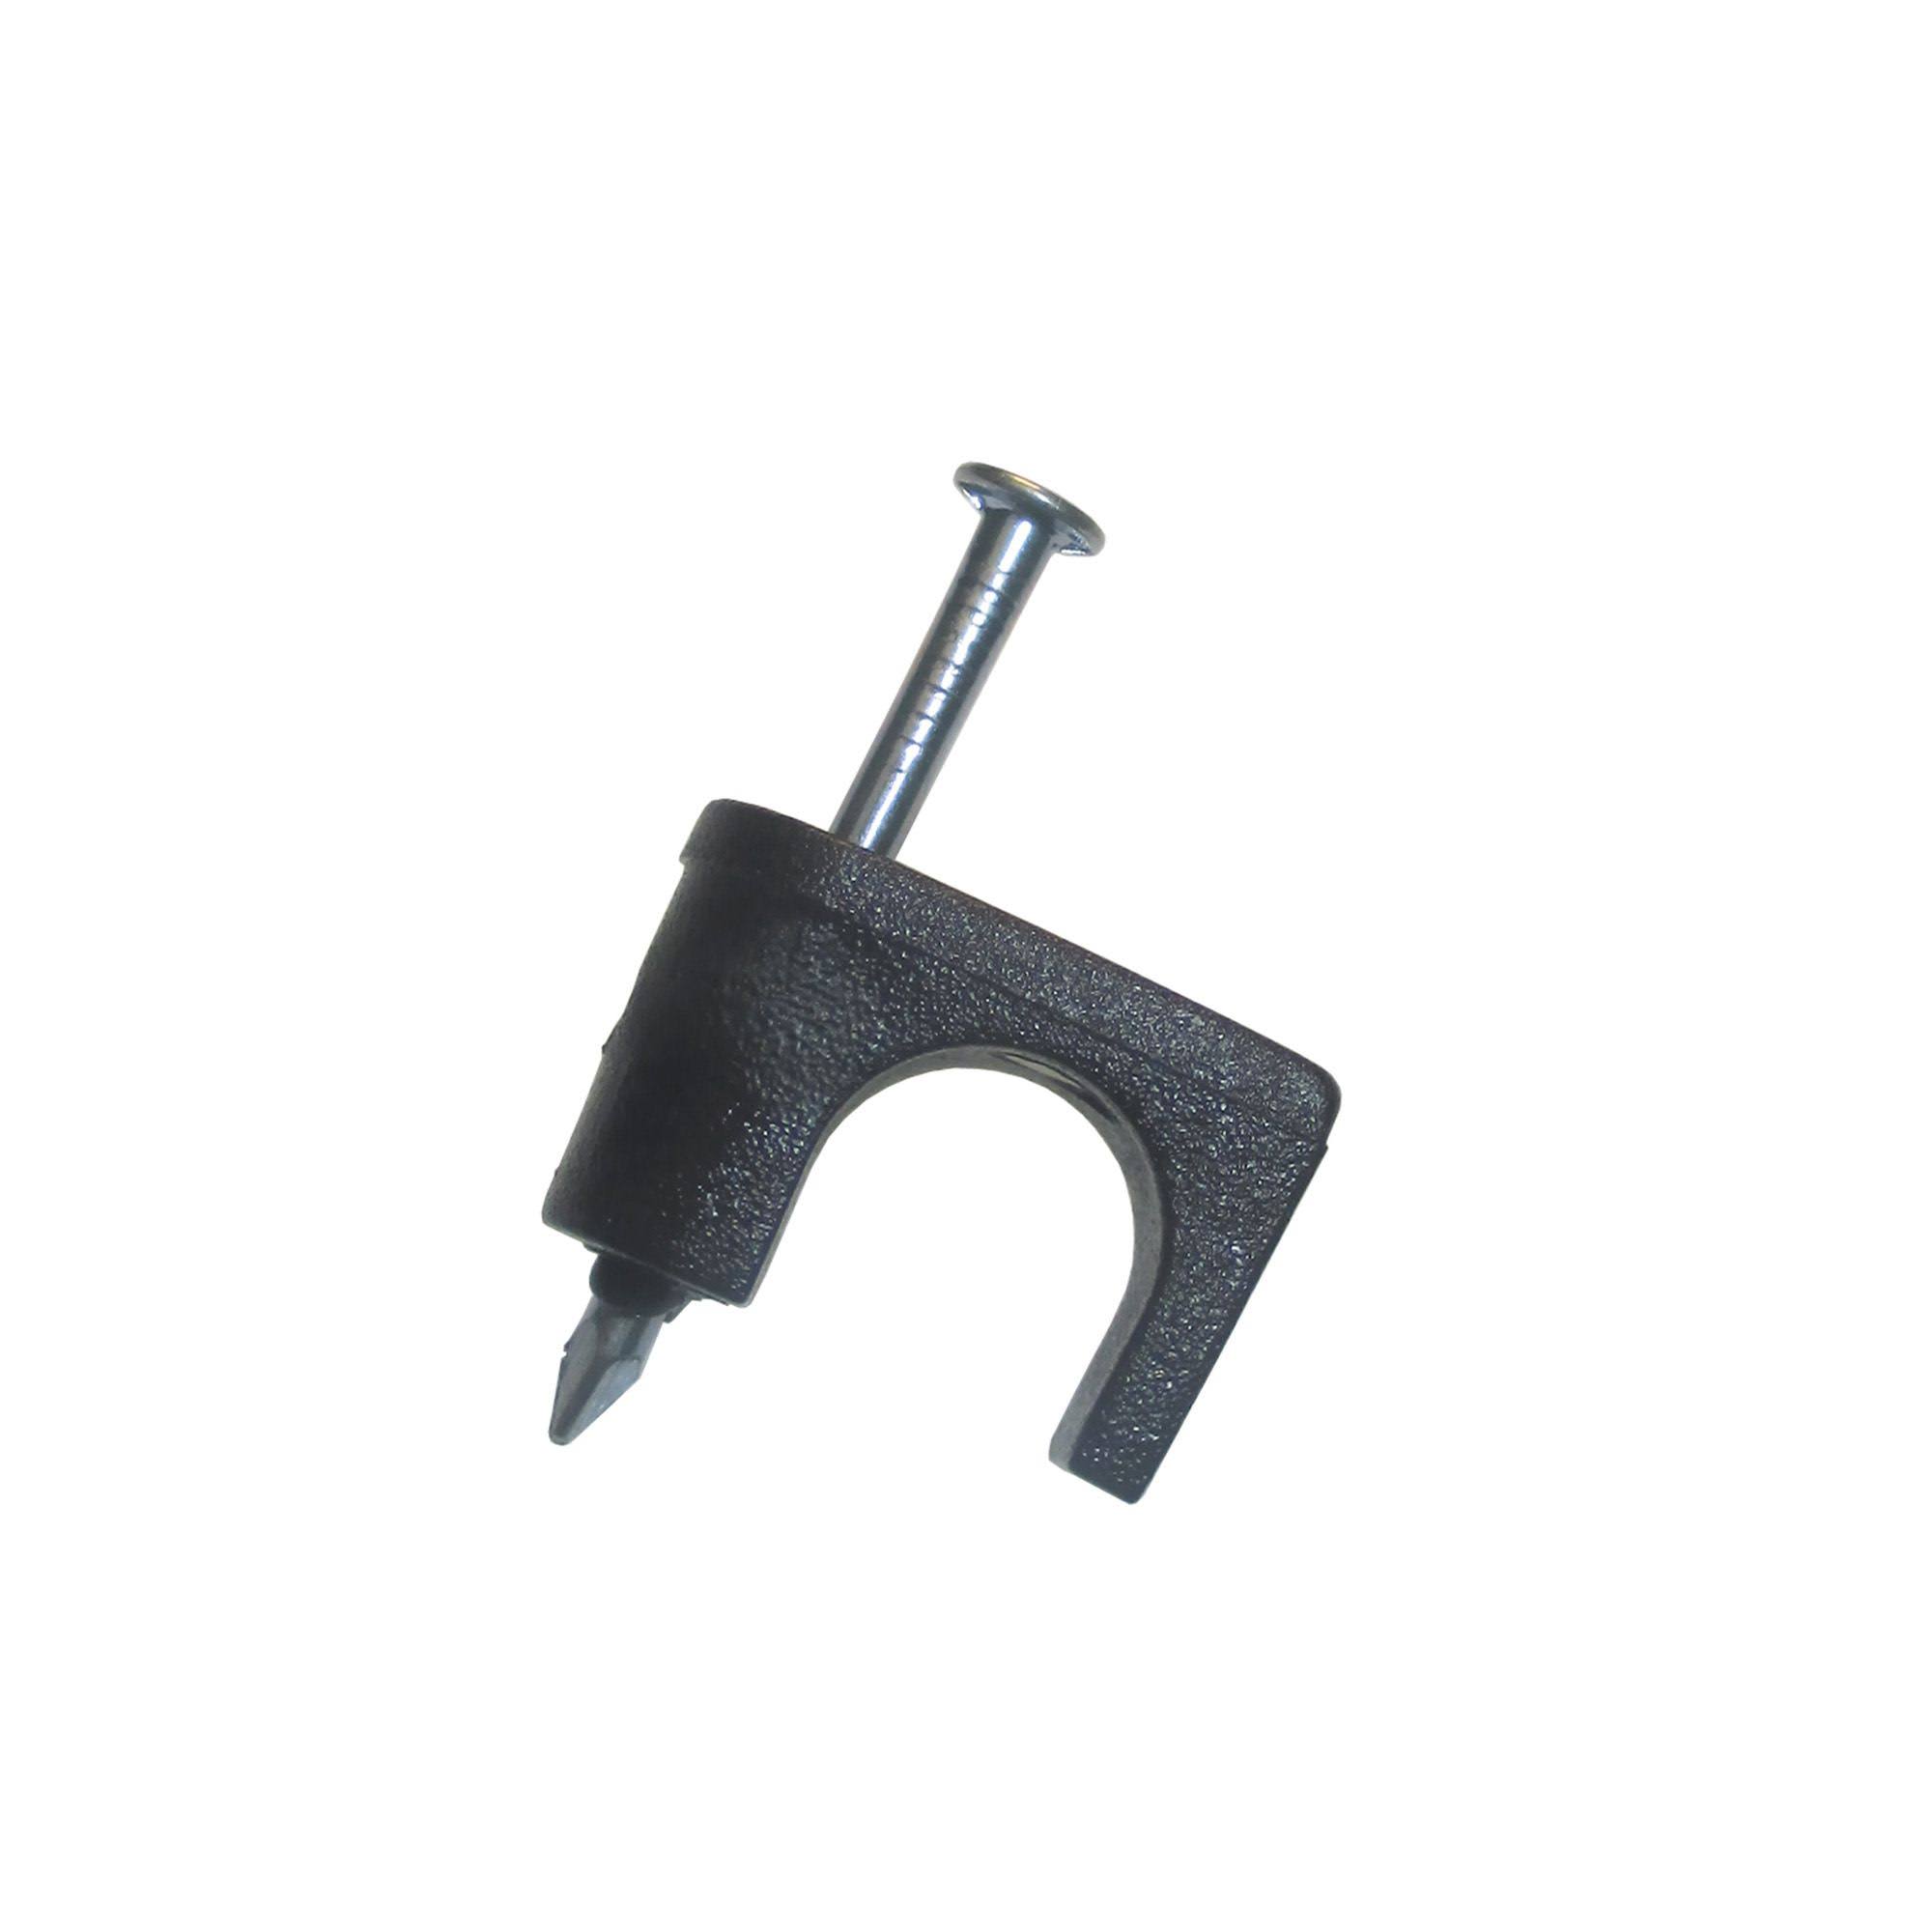 Gardner Bender Coaxial Cable Staple - Black